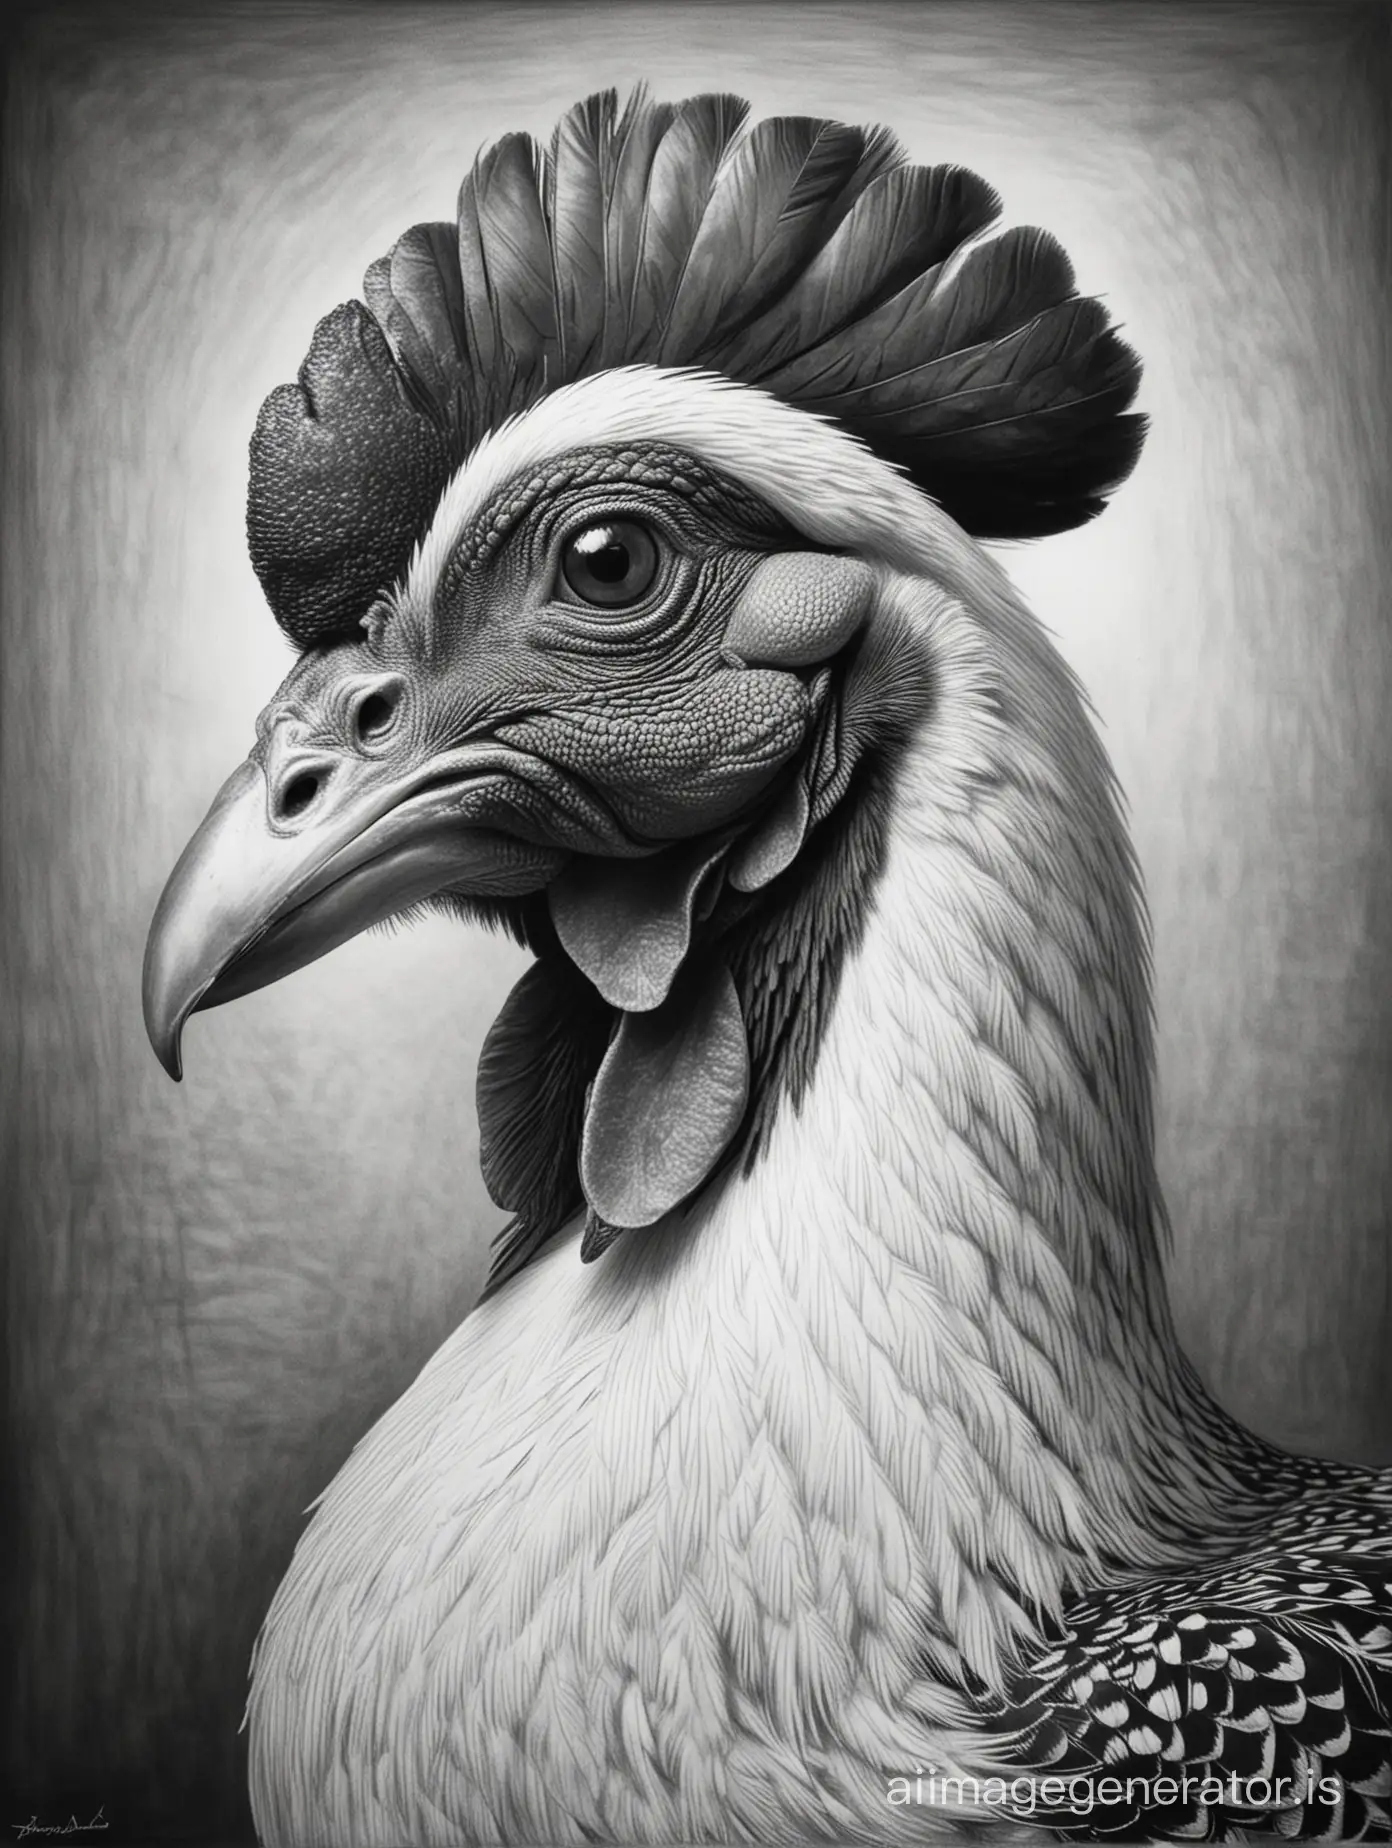 In Picasso's style created an artist's pencil drawing in black and white of a Malay Gamefowl head